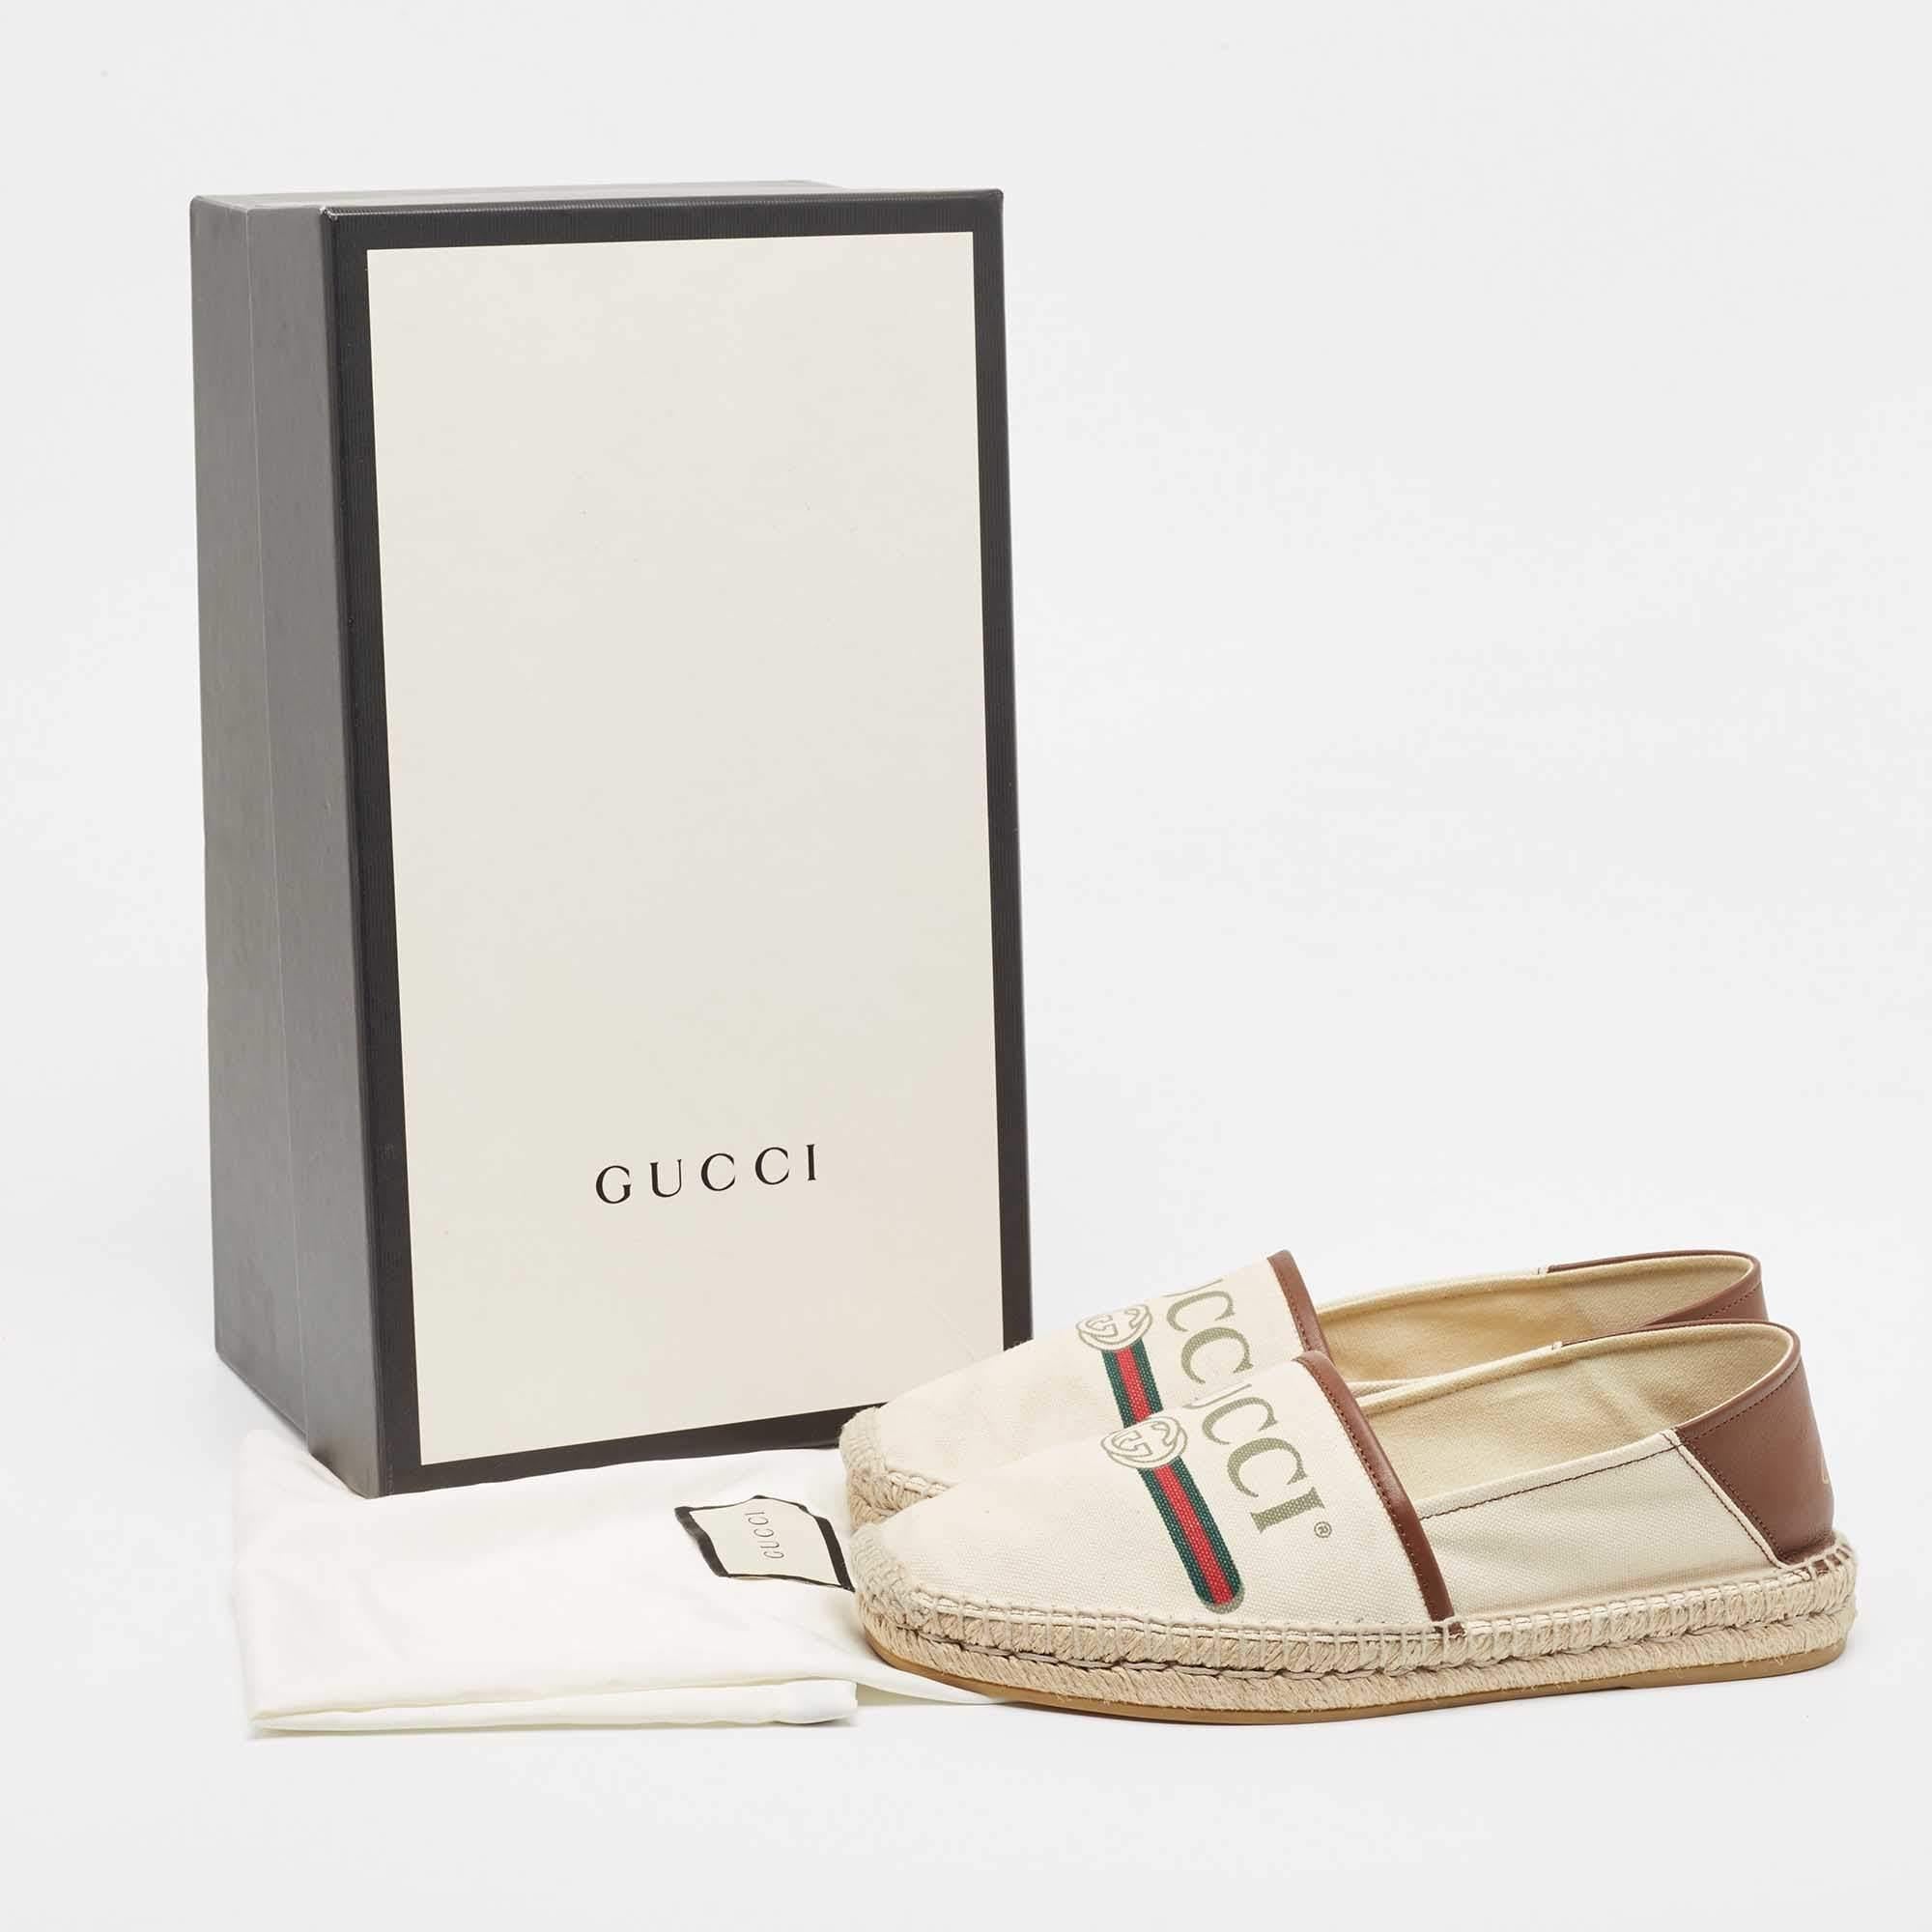 Gucci White/Brown Leather and Canvas Espadrille Flats Size 40 5